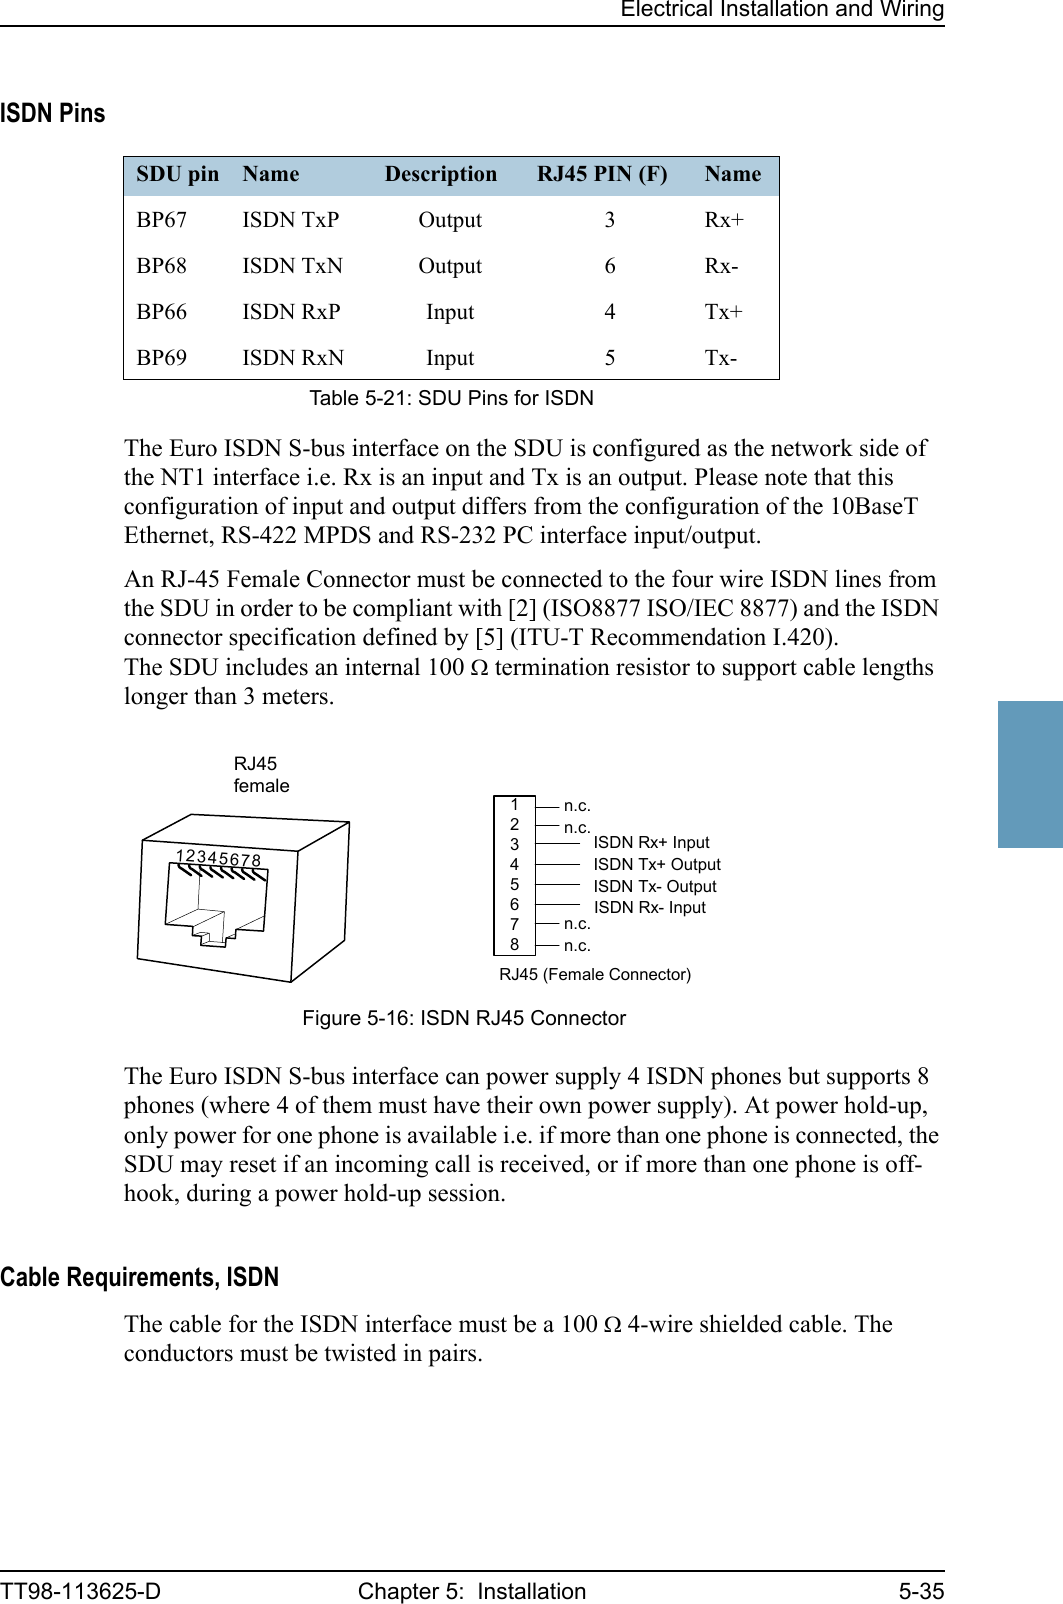 Electrical Installation and WiringTT98-113625-D Chapter 5:  Installation 5-355555ISDN PinsThe Euro ISDN S-bus interface on the SDU is configured as the network side of the NT1 interface i.e. Rx is an input and Tx is an output. Please note that this configuration of input and output differs from the configuration of the 10BaseT Ethernet, RS-422 MPDS and RS-232 PC interface input/output.An RJ-45 Female Connector must be connected to the four wire ISDN lines from the SDU in order to be compliant with [2] (ISO8877 ISO/IEC 8877) and the ISDN connector specification defined by [5] (ITU-T Recommendation I.420). The SDU includes an internal 100 Ω termination resistor to support cable lengths longer than 3 meters.The Euro ISDN S-bus interface can power supply 4 ISDN phones but supports 8 phones (where 4 of them must have their own power supply). At power hold-up, only power for one phone is available i.e. if more than one phone is connected, the SDU may reset if an incoming call is received, or if more than one phone is off-hook, during a power hold-up session. Cable Requirements, ISDNThe cable for the ISDN interface must be a 100 Ω 4-wire shielded cable. The conductors must be twisted in pairs.SDU pin Name Description RJ45 PIN (F) NameBP67 ISDN TxP Output 3 Rx+BP68 ISDN TxN Output 6 Rx-BP66 ISDN RxP Input 4 Tx+BP69 ISDN RxN Input 5 Tx-Table 5-21: SDU Pins for ISDNFigure 5-16: ISDN RJ45 Connector12345678ISDN Rx+ InputISDN Tx+ OutputISDN Tx- OutputISDN Rx- Inputn.c.n.c.n.c.n.c.RJ45 (Female Connector)RJ45female12345678